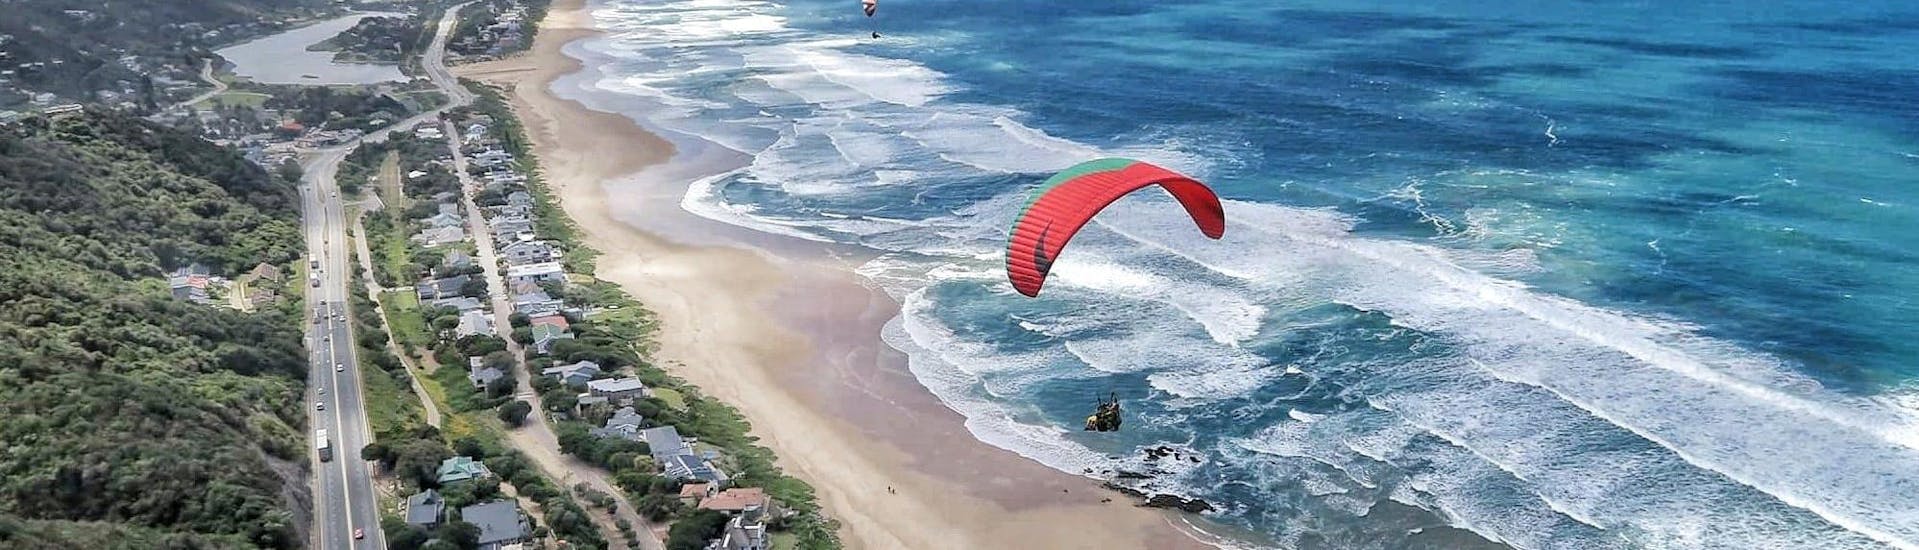 Experienced tandem pilot from Dolphin Paragliding Wilderness is flying with a client above the roaring ocean.